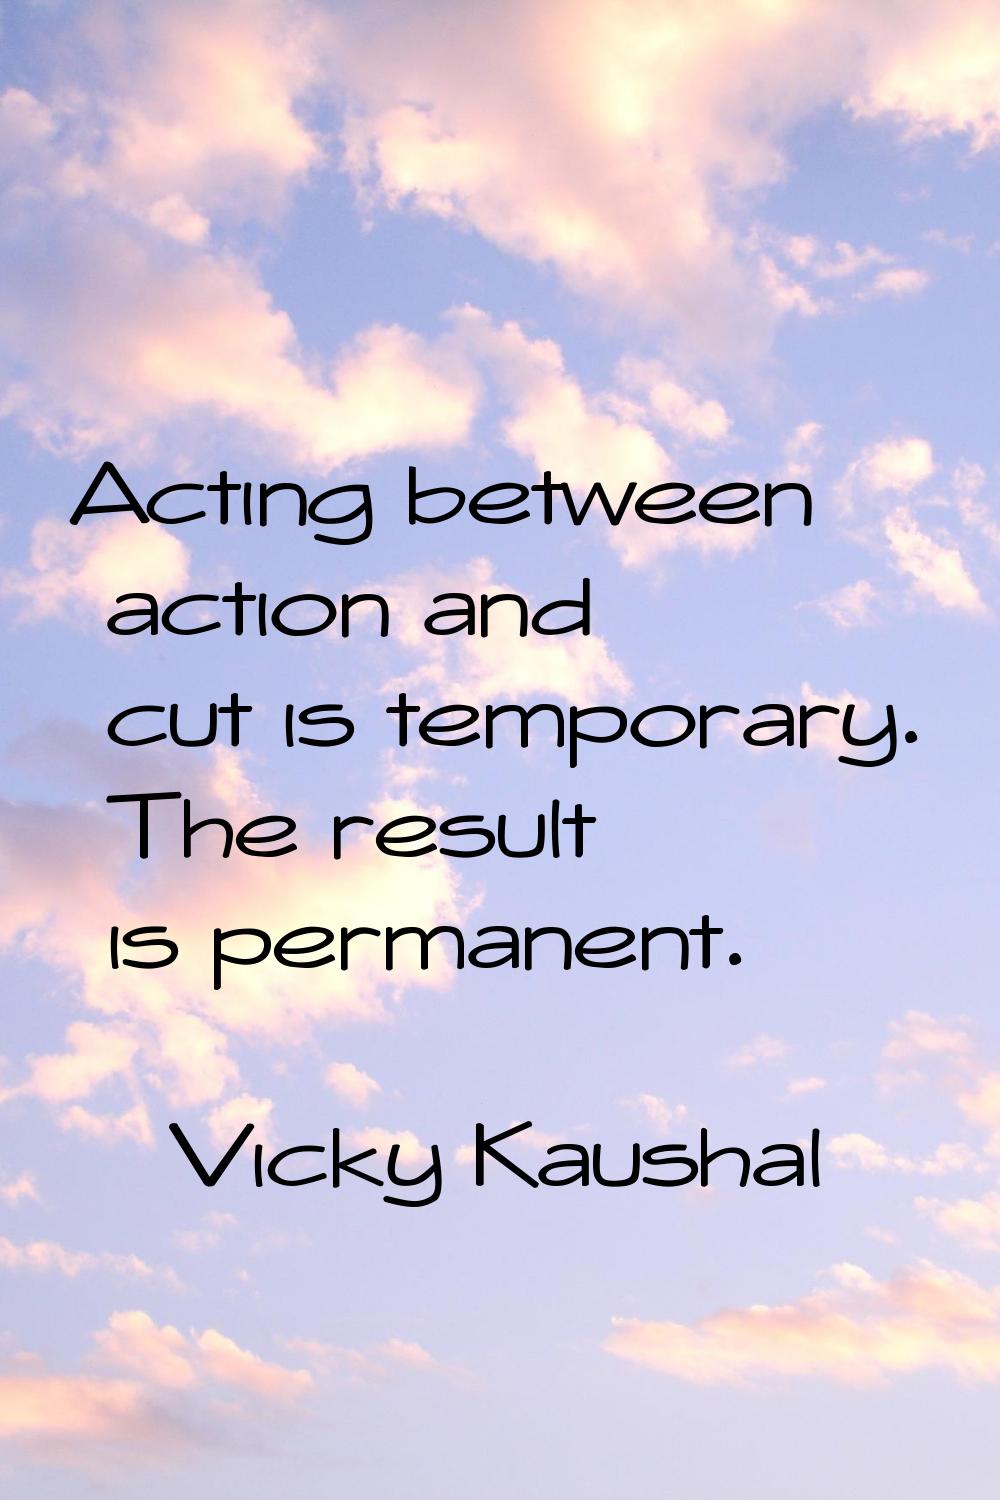 Acting between action and cut is temporary. The result is permanent.